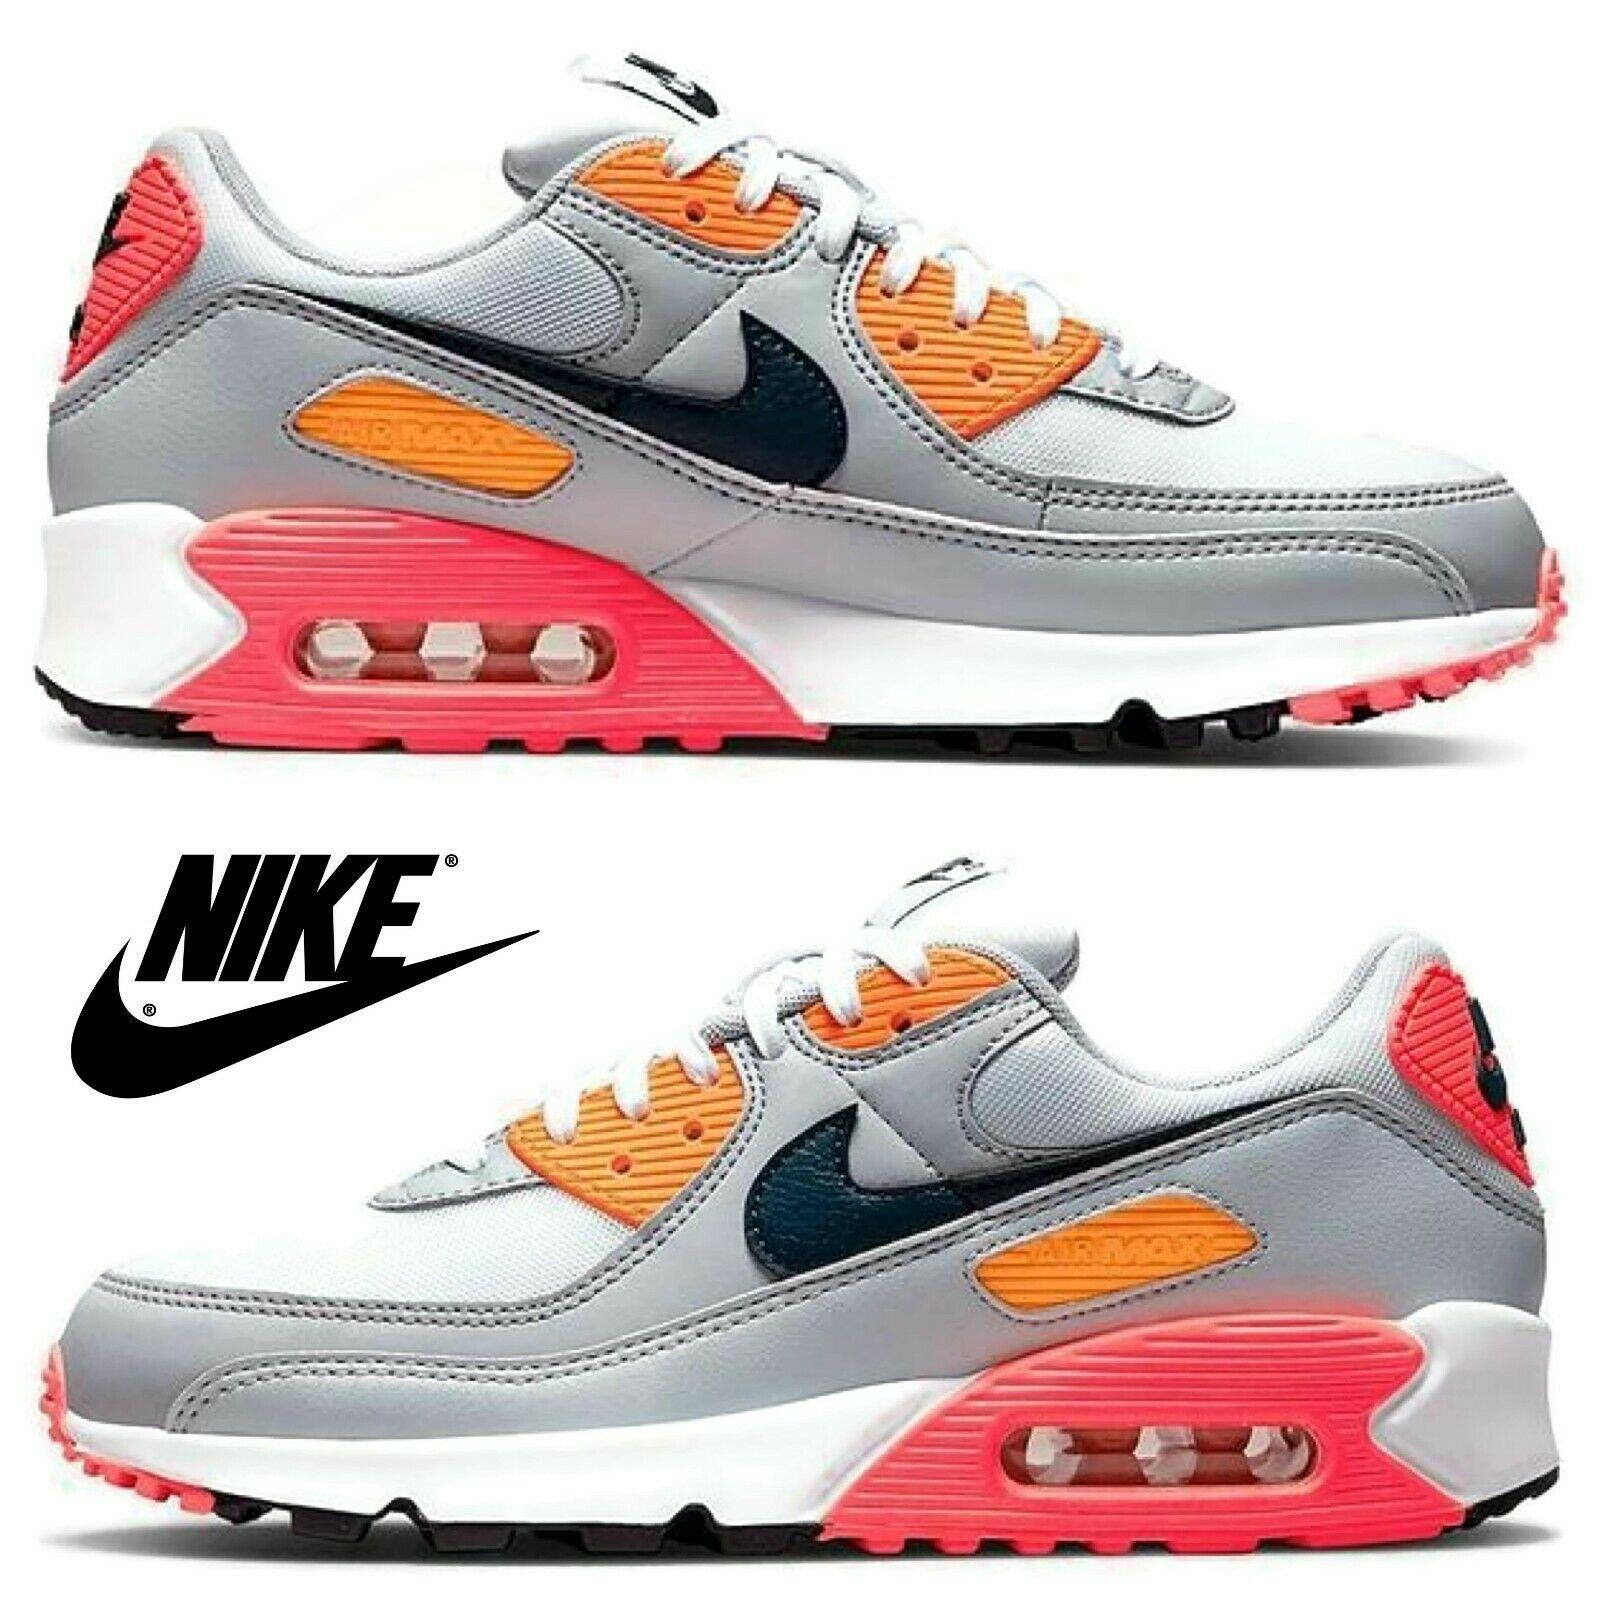 Nike Air Max 90 Women s Sneakers Casual Shoes Premium Running Sport Gym Gray